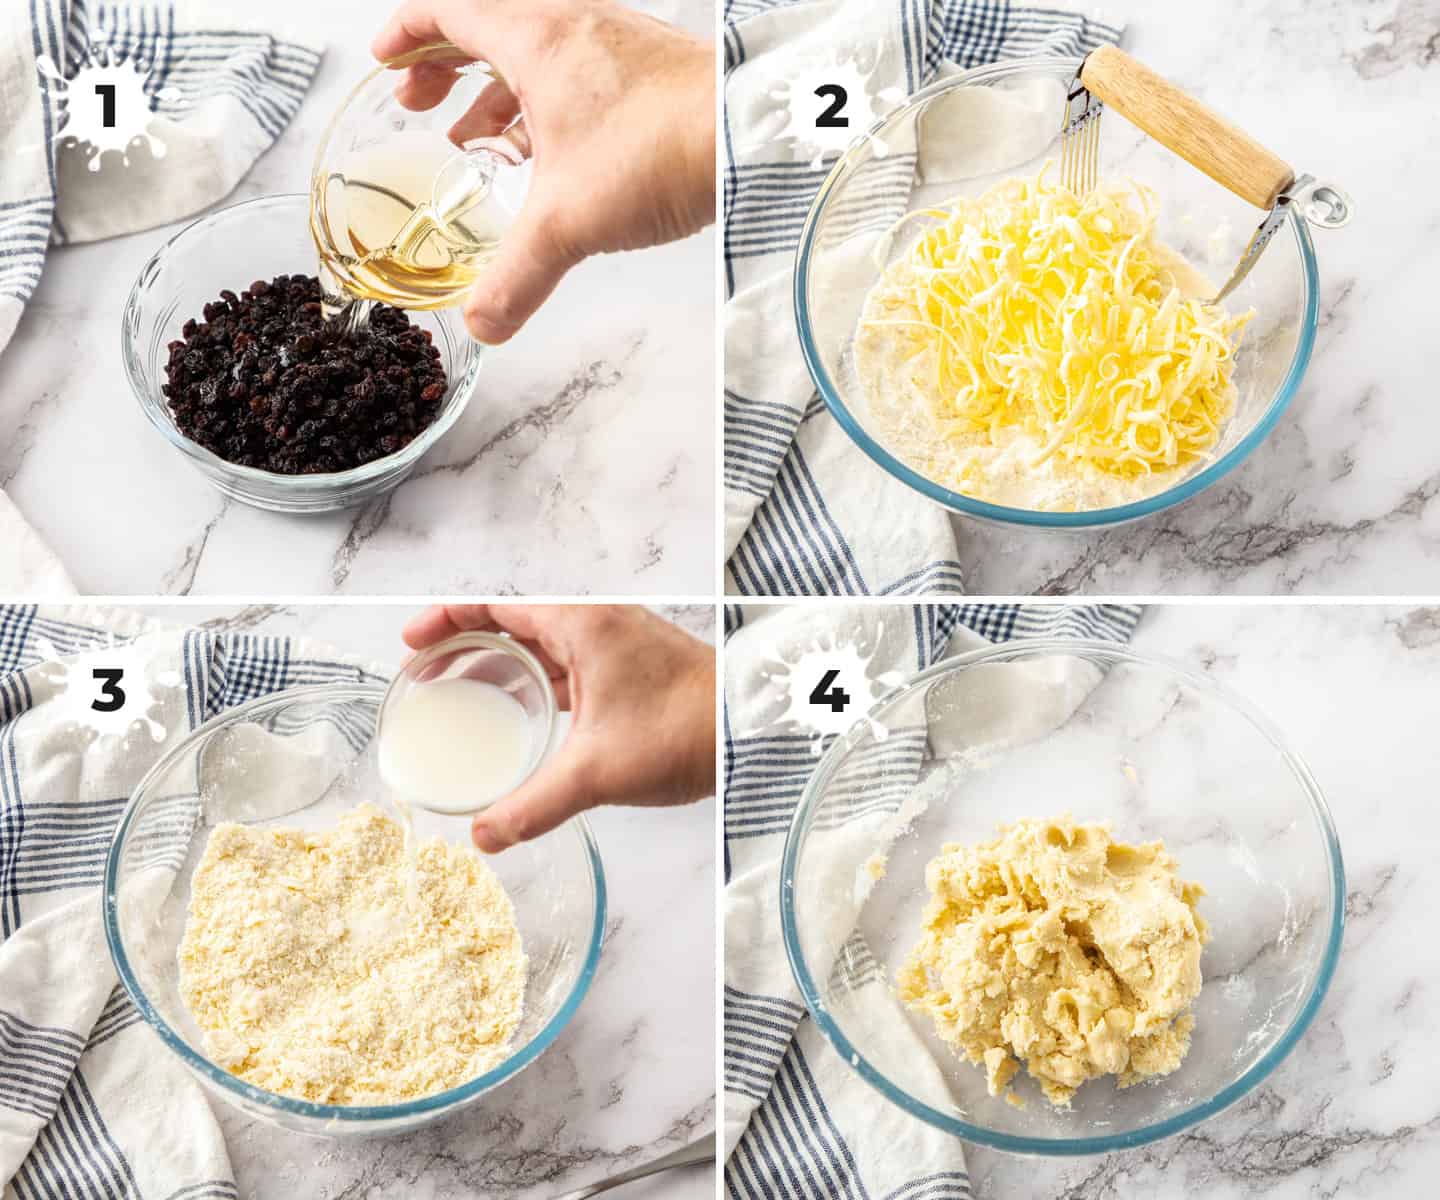 A collage of 4 images showing the blending of ingredients to make dough.